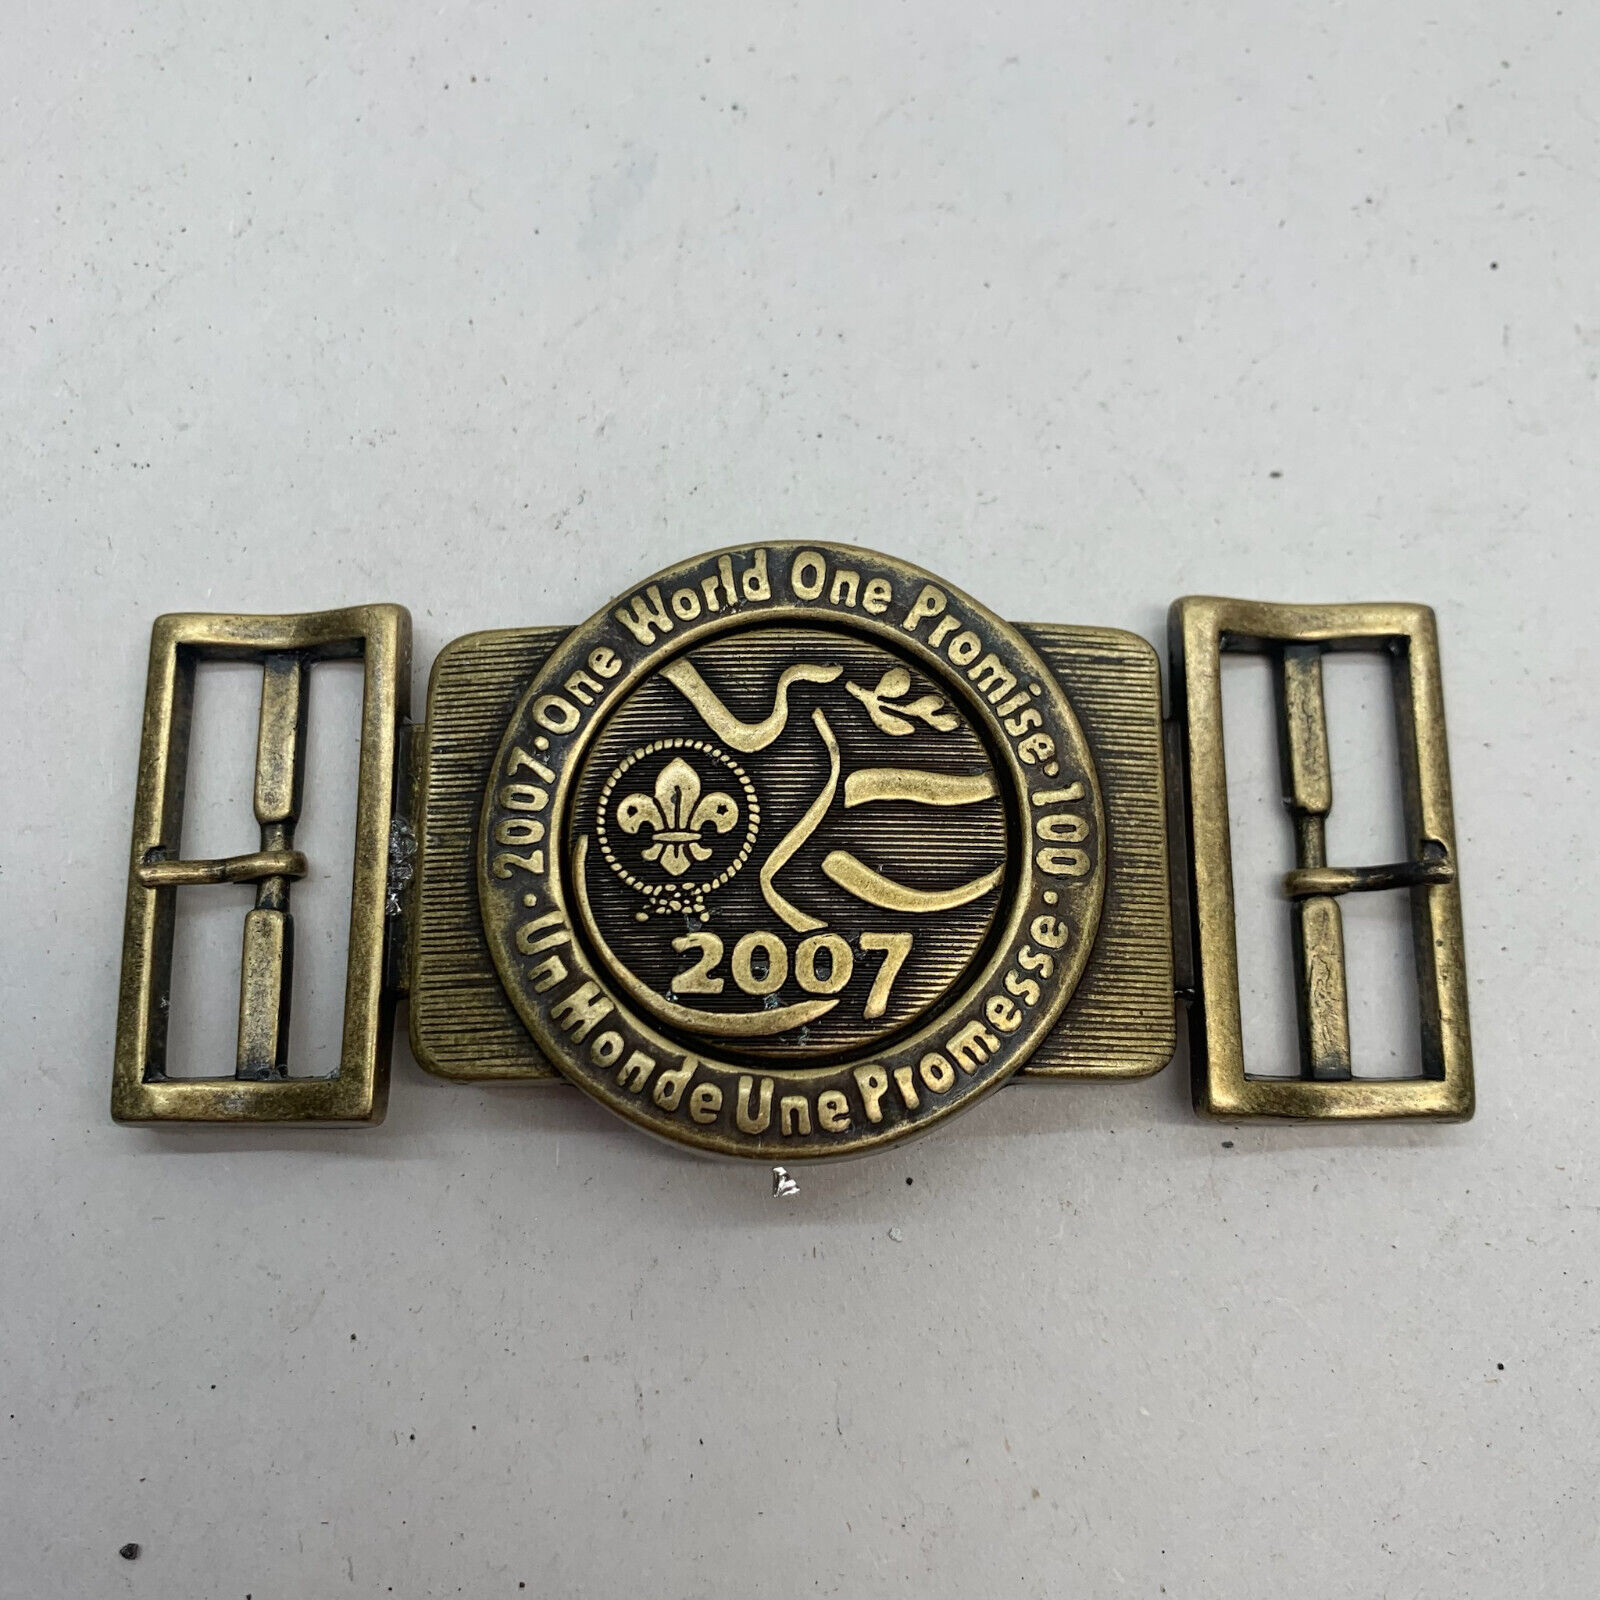 2007 World Scout Jamboree One World One Promise Bronzed Belt Buckle 100 Years